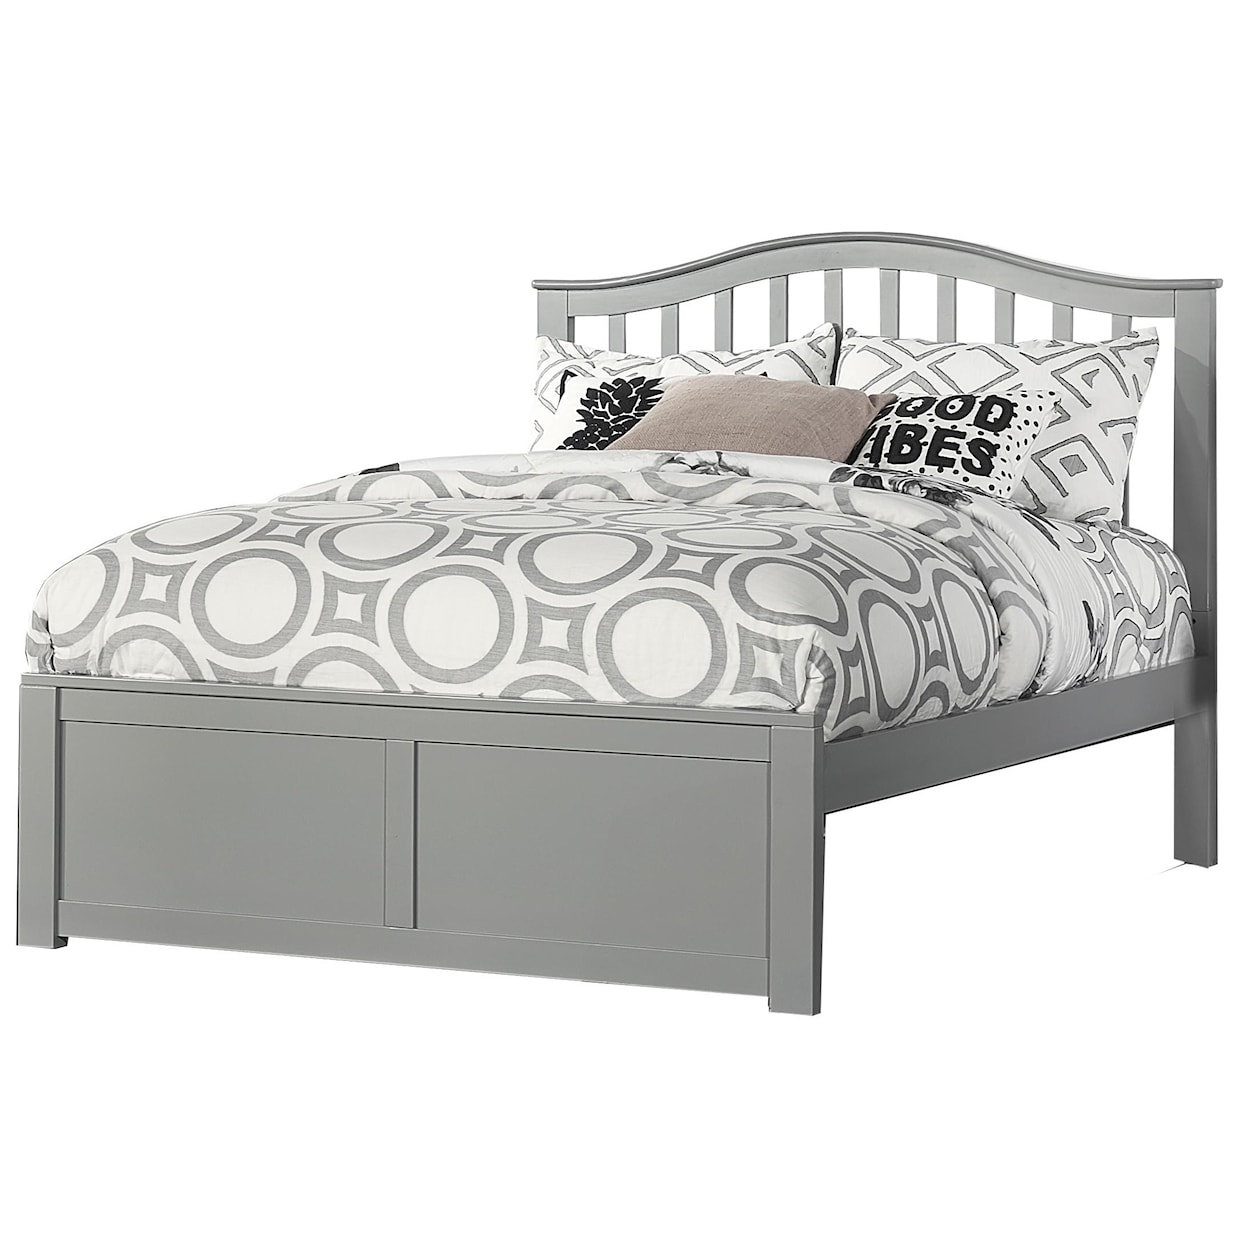 RG Kids Schoolhouse 4.0 Youth Full Bed